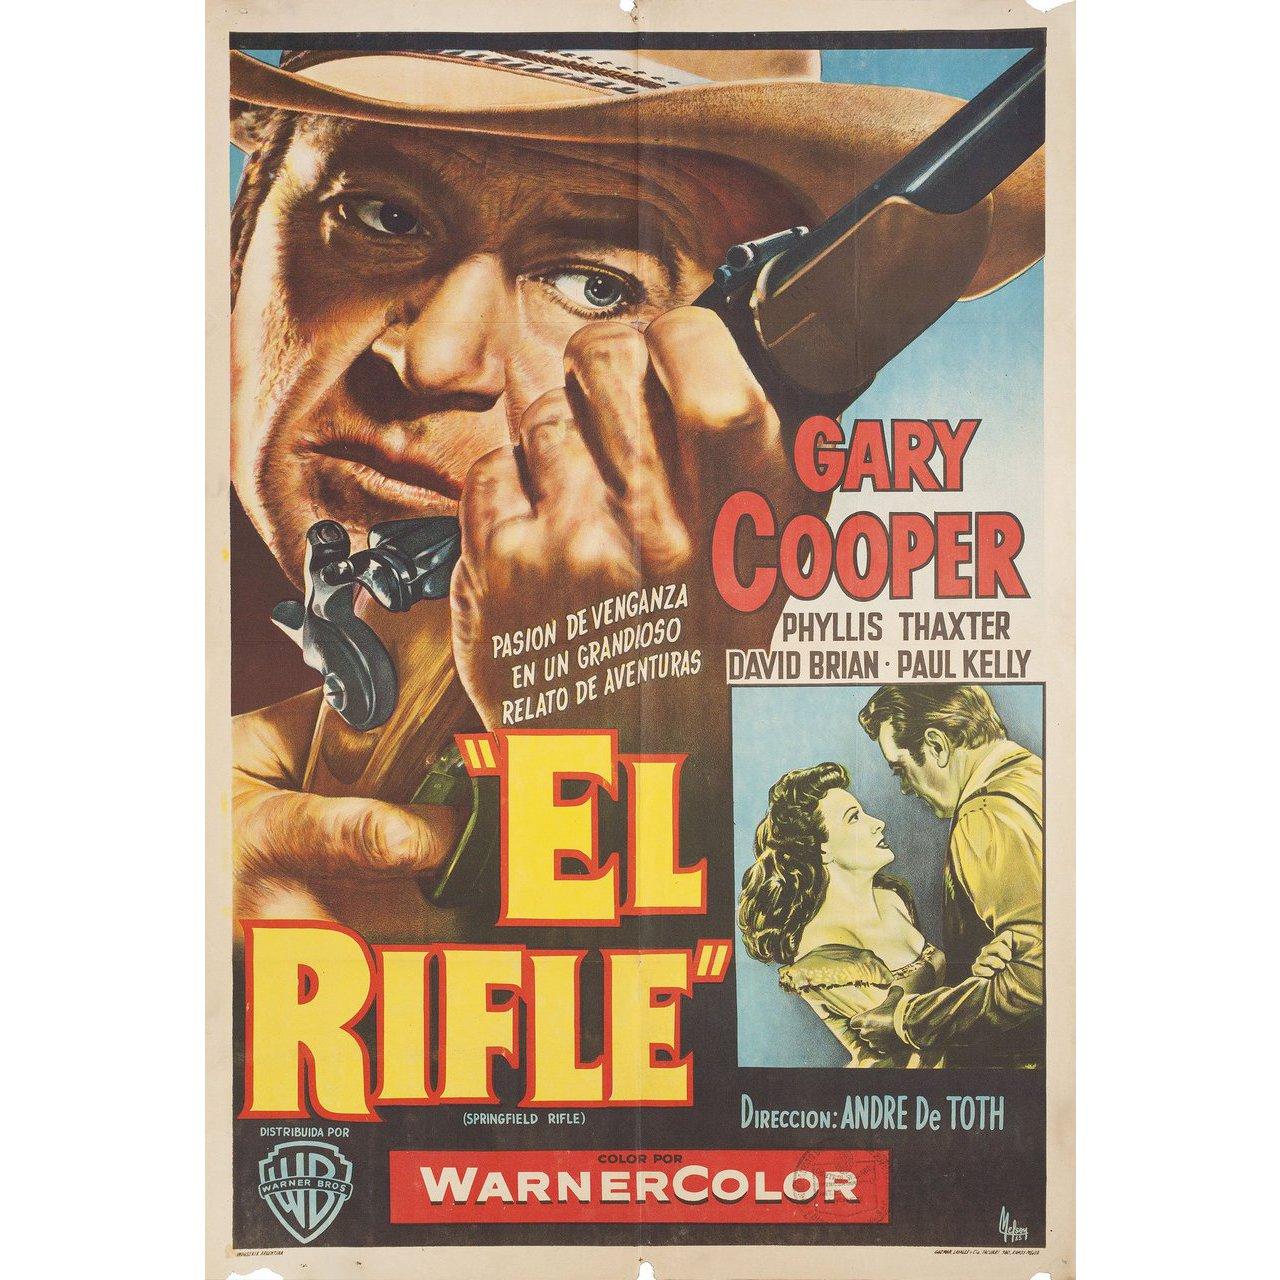 Original 1955 Argentine poster by Nelson for the 1952 film 'Springfield Rifle' directed by Andre De Toth with Gary Cooper / Phyllis Thaxter / David Brian / Paul Kelly. Very good-fine condition, folded. Many original posters were issued folded or